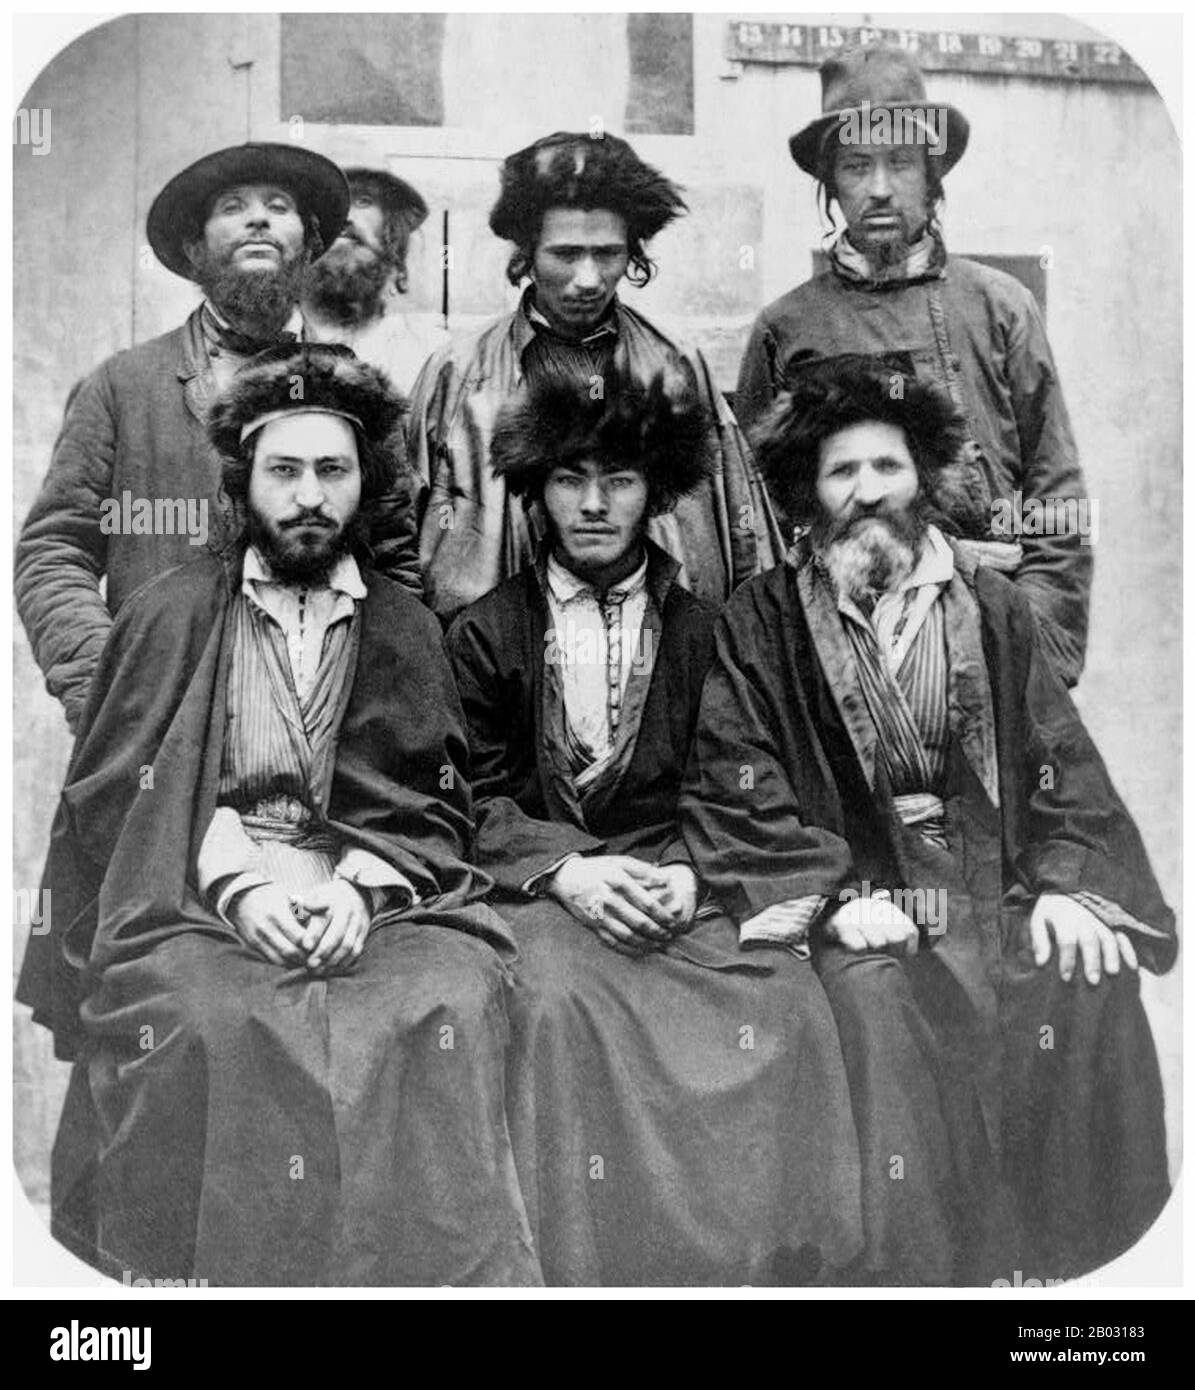 Ashkenazi Jews, also known as Ashkenazic Jews or simply Ashkenazim ('The Jews of Germany'), are a Jewish ethnic division who coalesced as a distinct community of Jews in the Holy Roman Empire around the end of the 1st millennium.  The traditional language of Ashkenazi Jews consisted of various dialects of Yiddish. Stock Photo